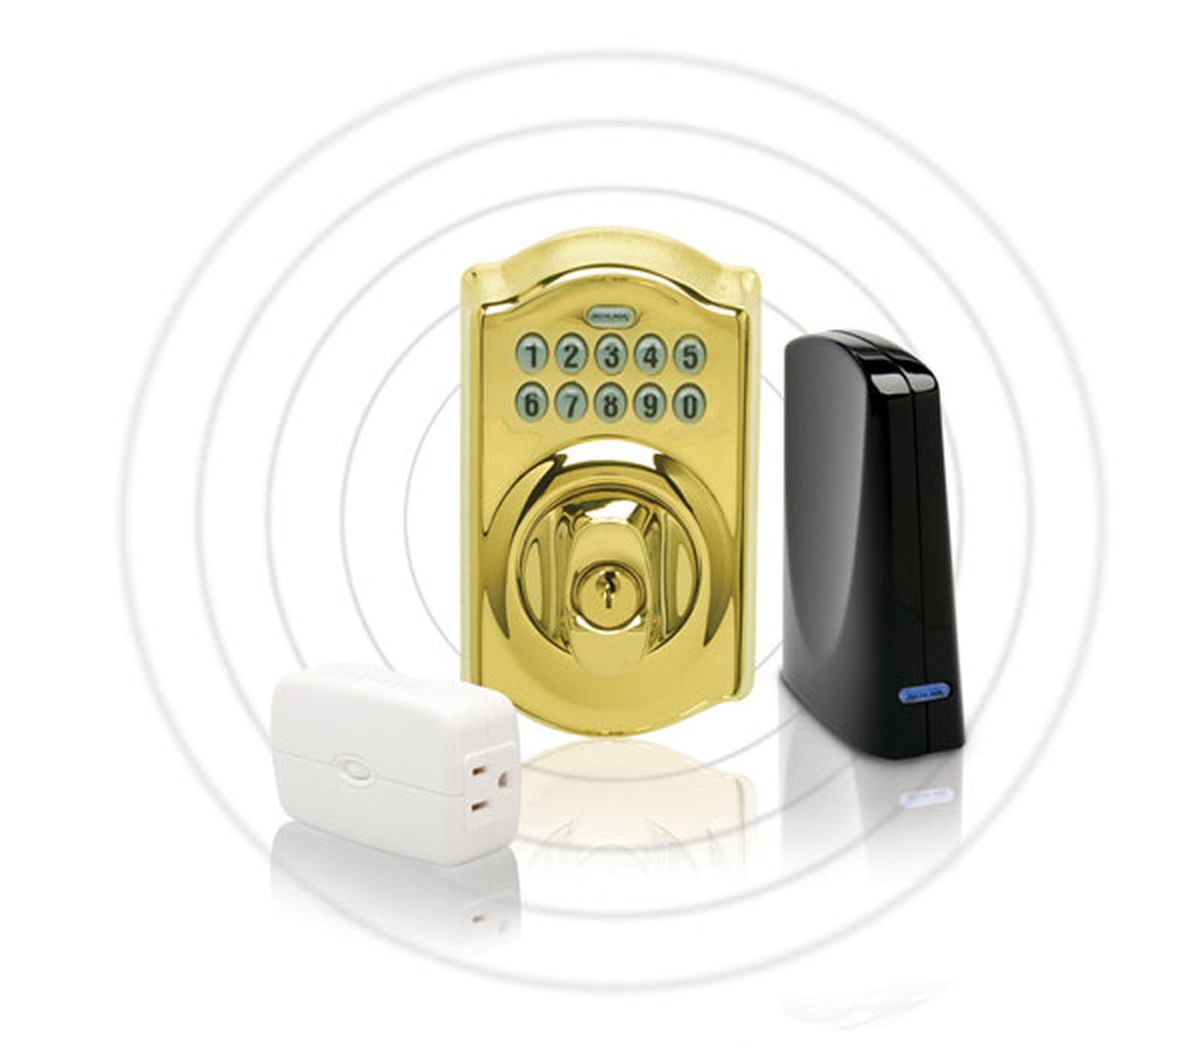 The Schlage Link system allows a homeowner to remotely unlock doors if someone gets locked out.